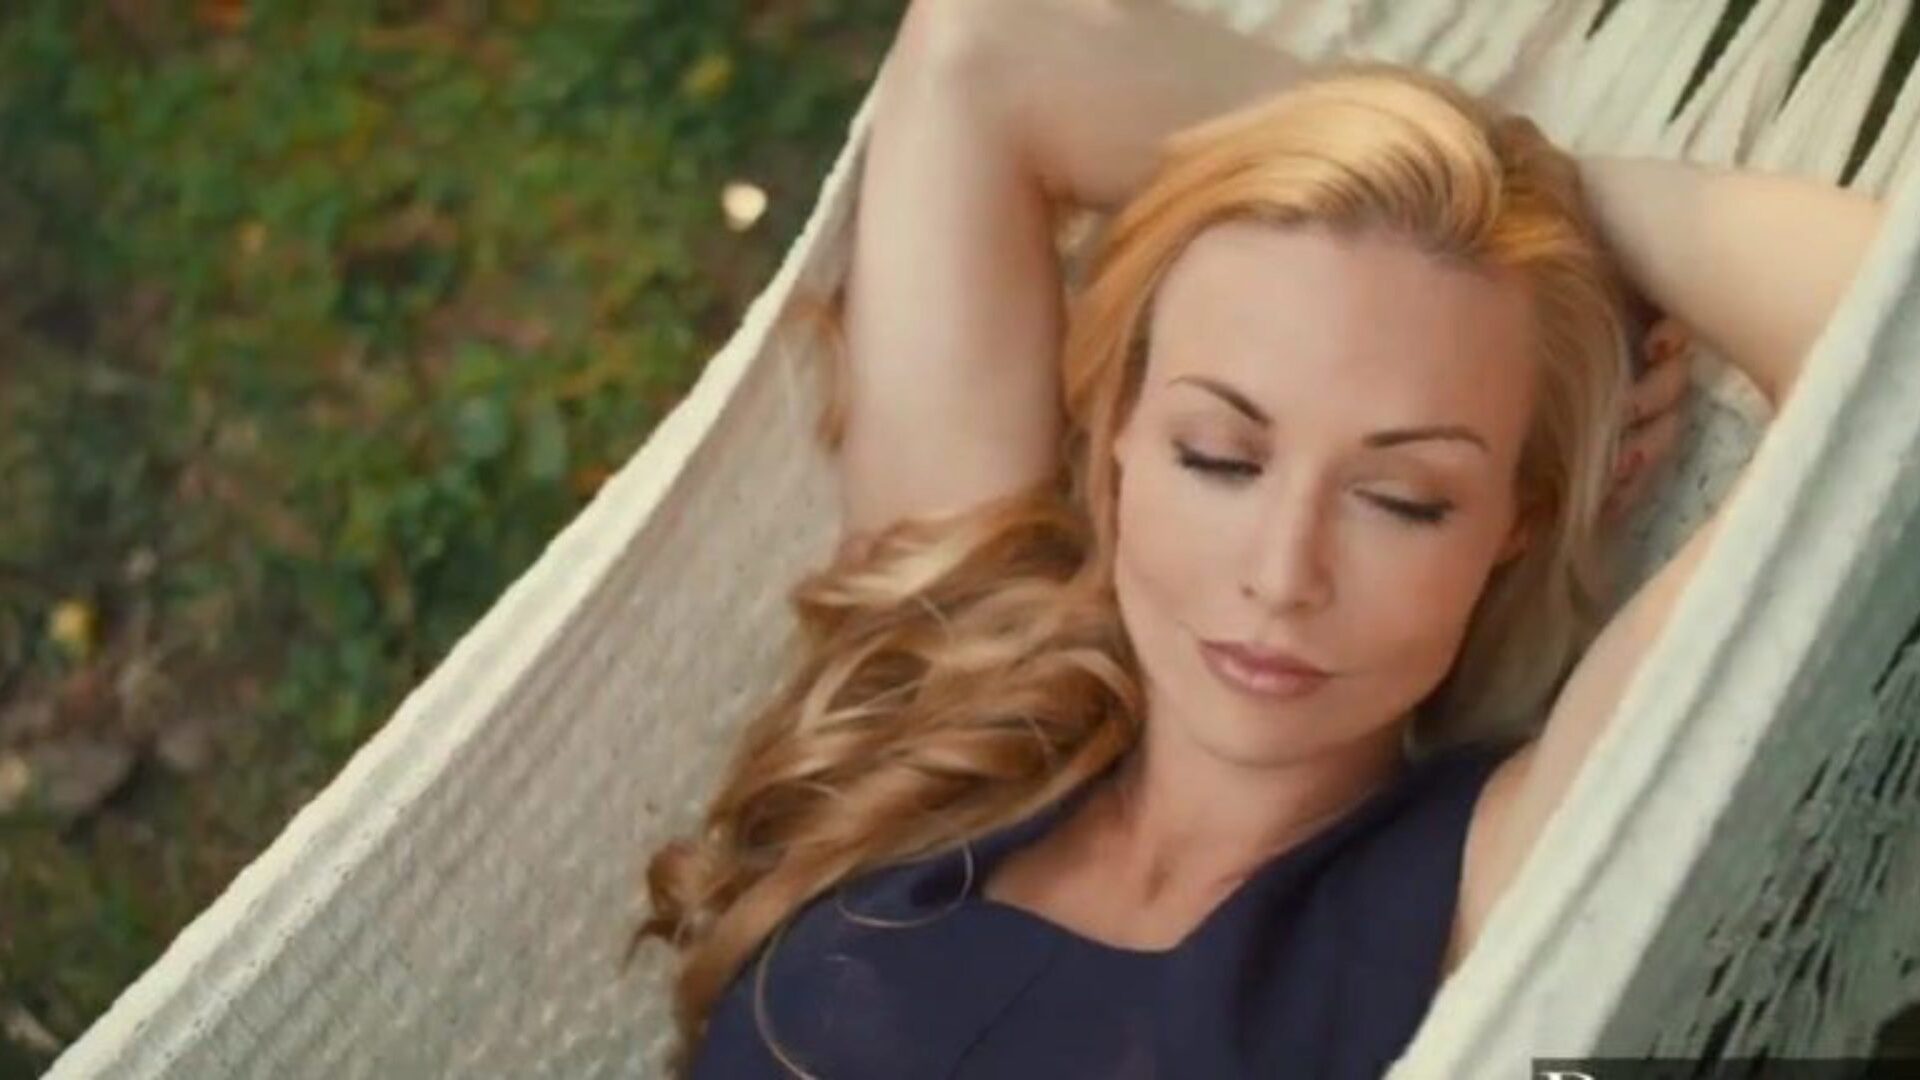 Deeper. Kayden Kross is a Painting of Perfection